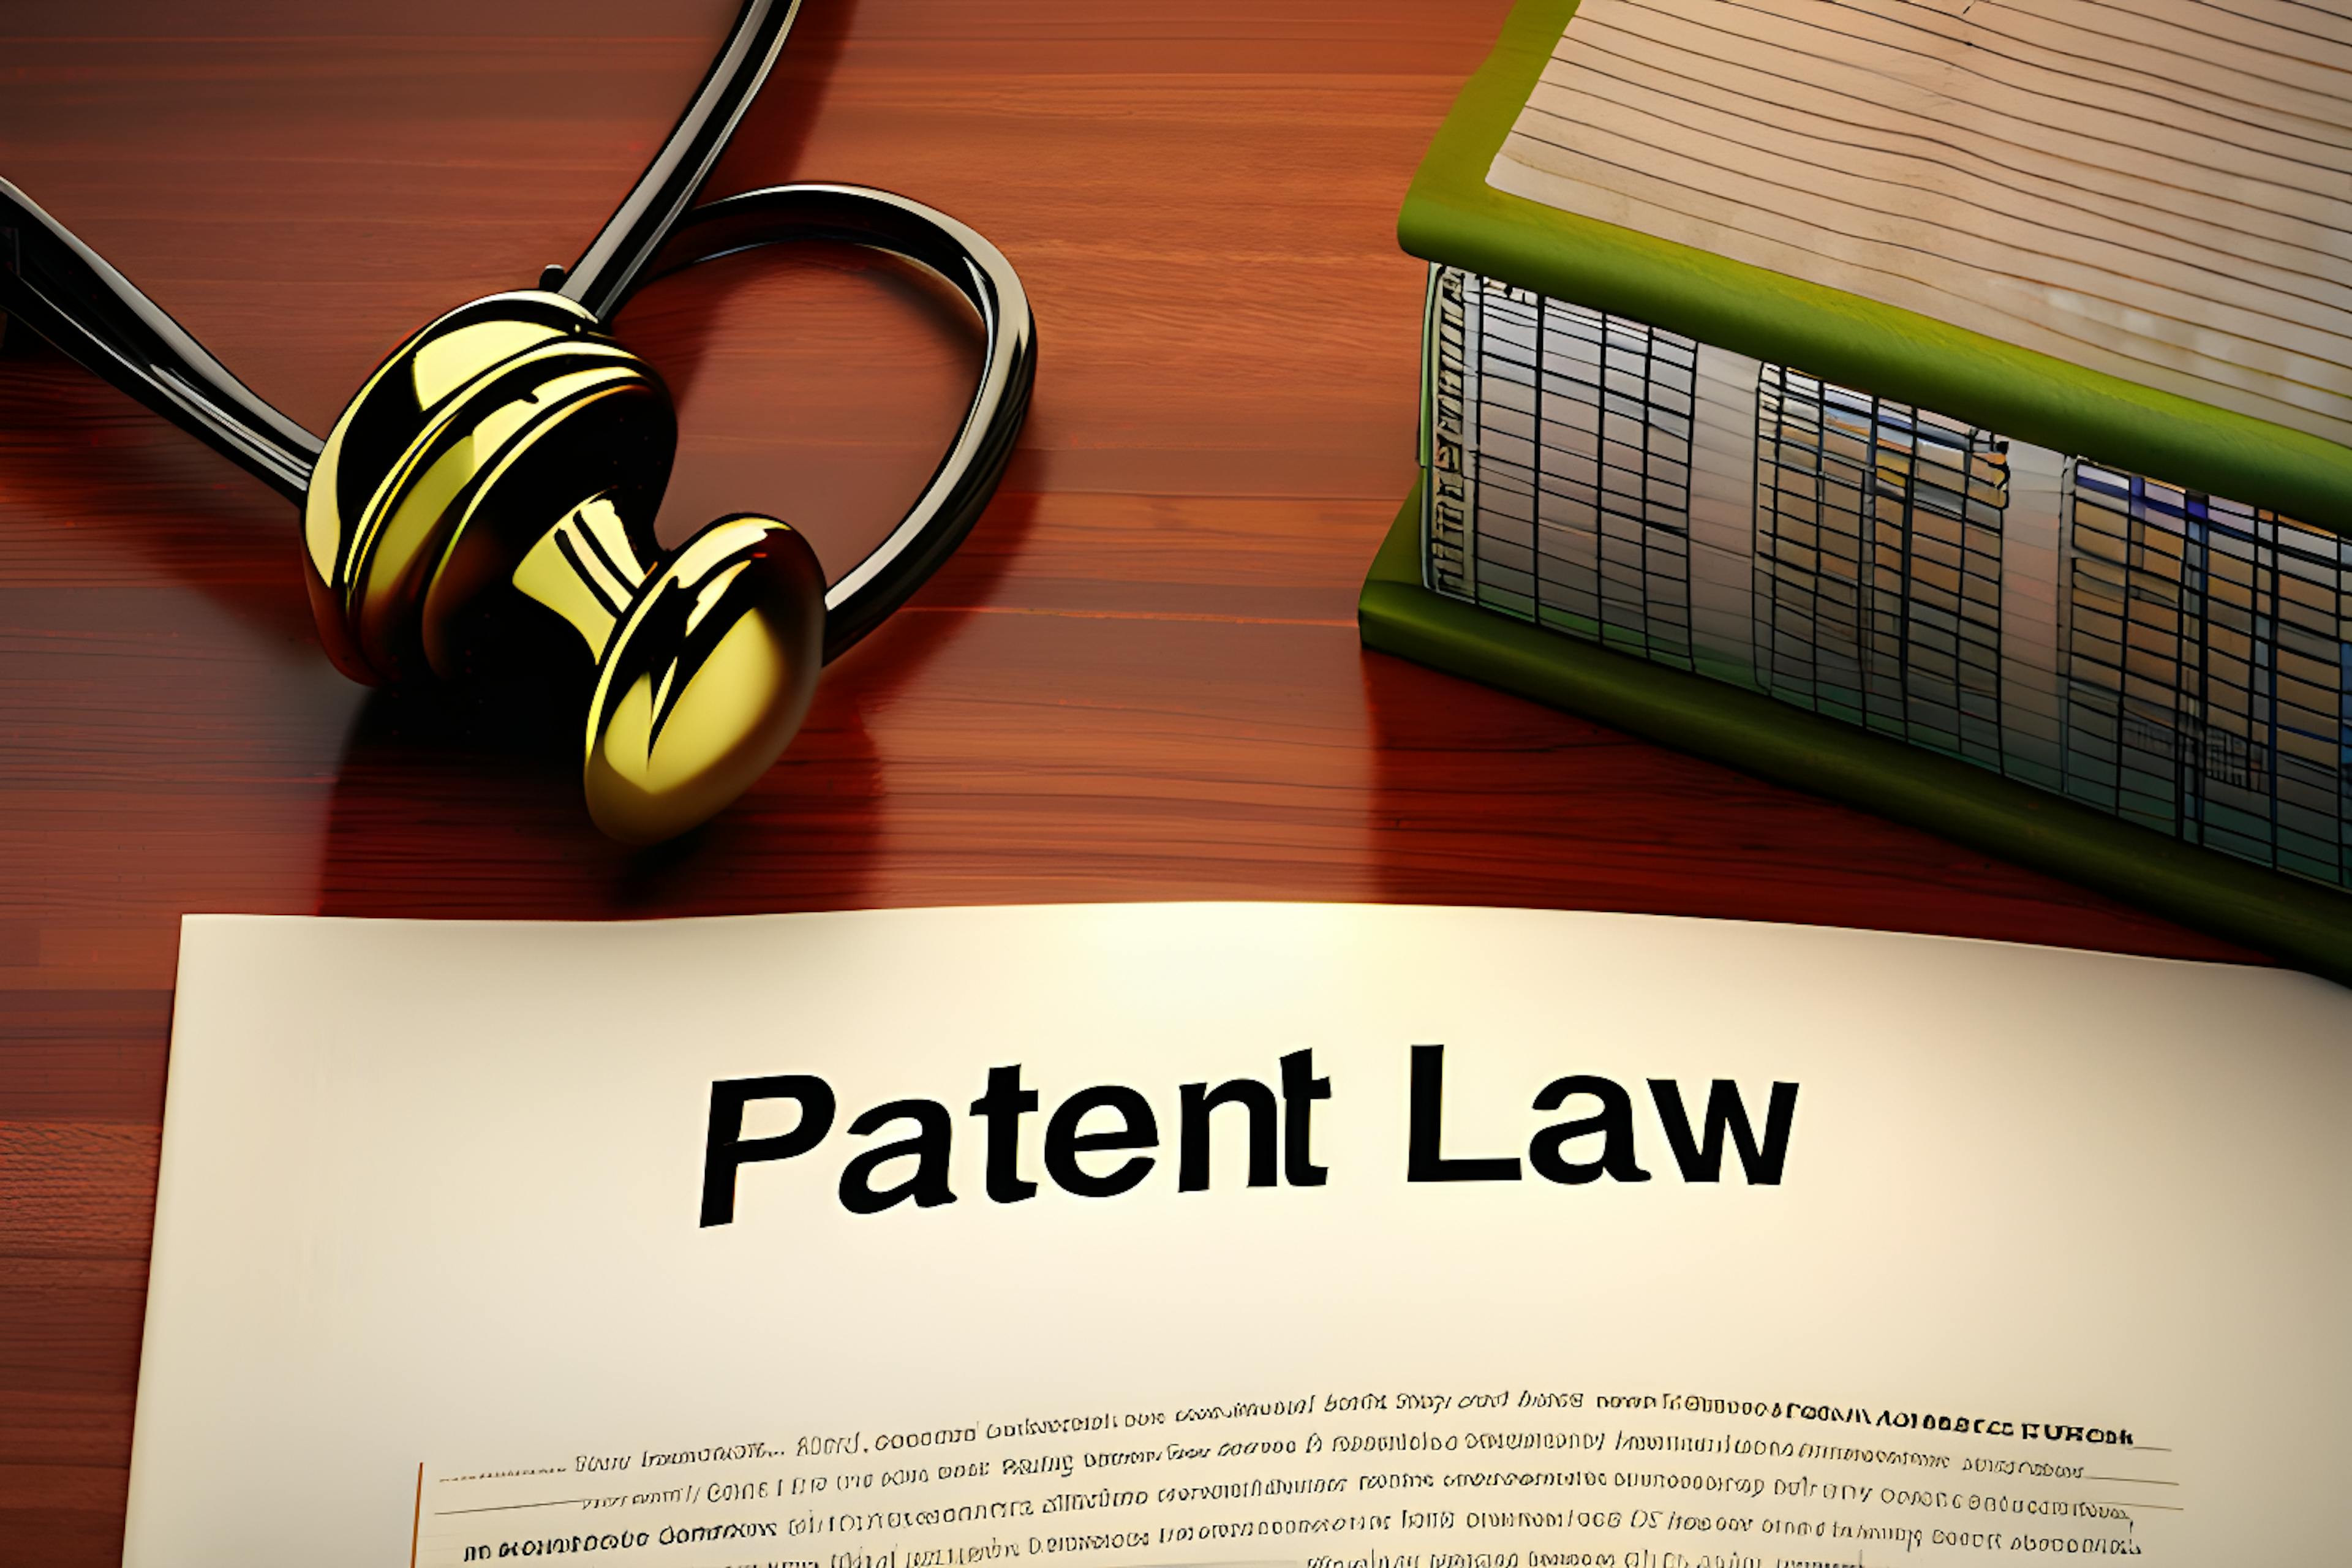 featured image - Baker vs. Selden: The Lawsuit that Changed Patent Law 